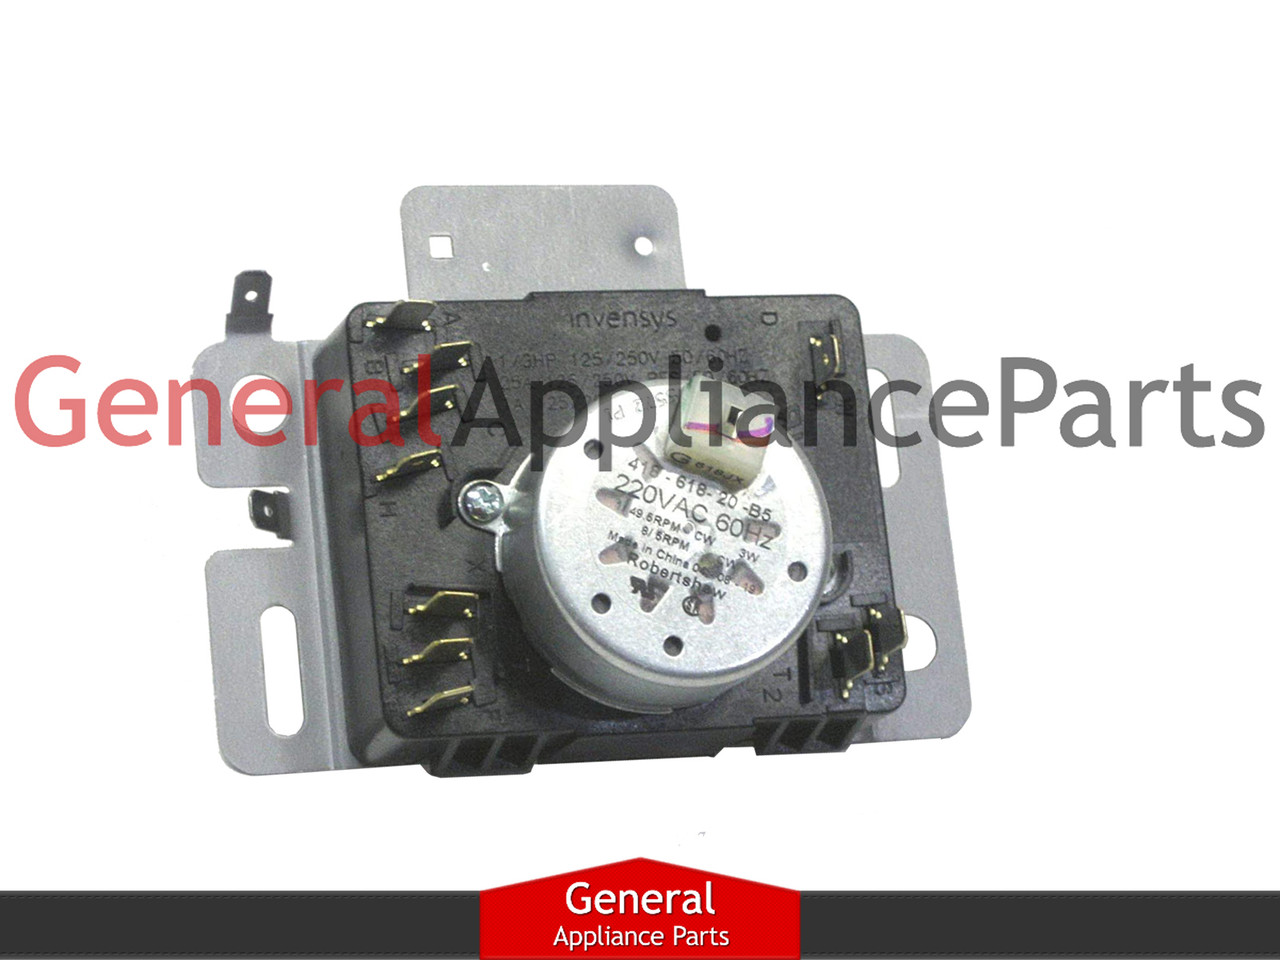 Whirlpool W10436308 Dryer Timer for sale online